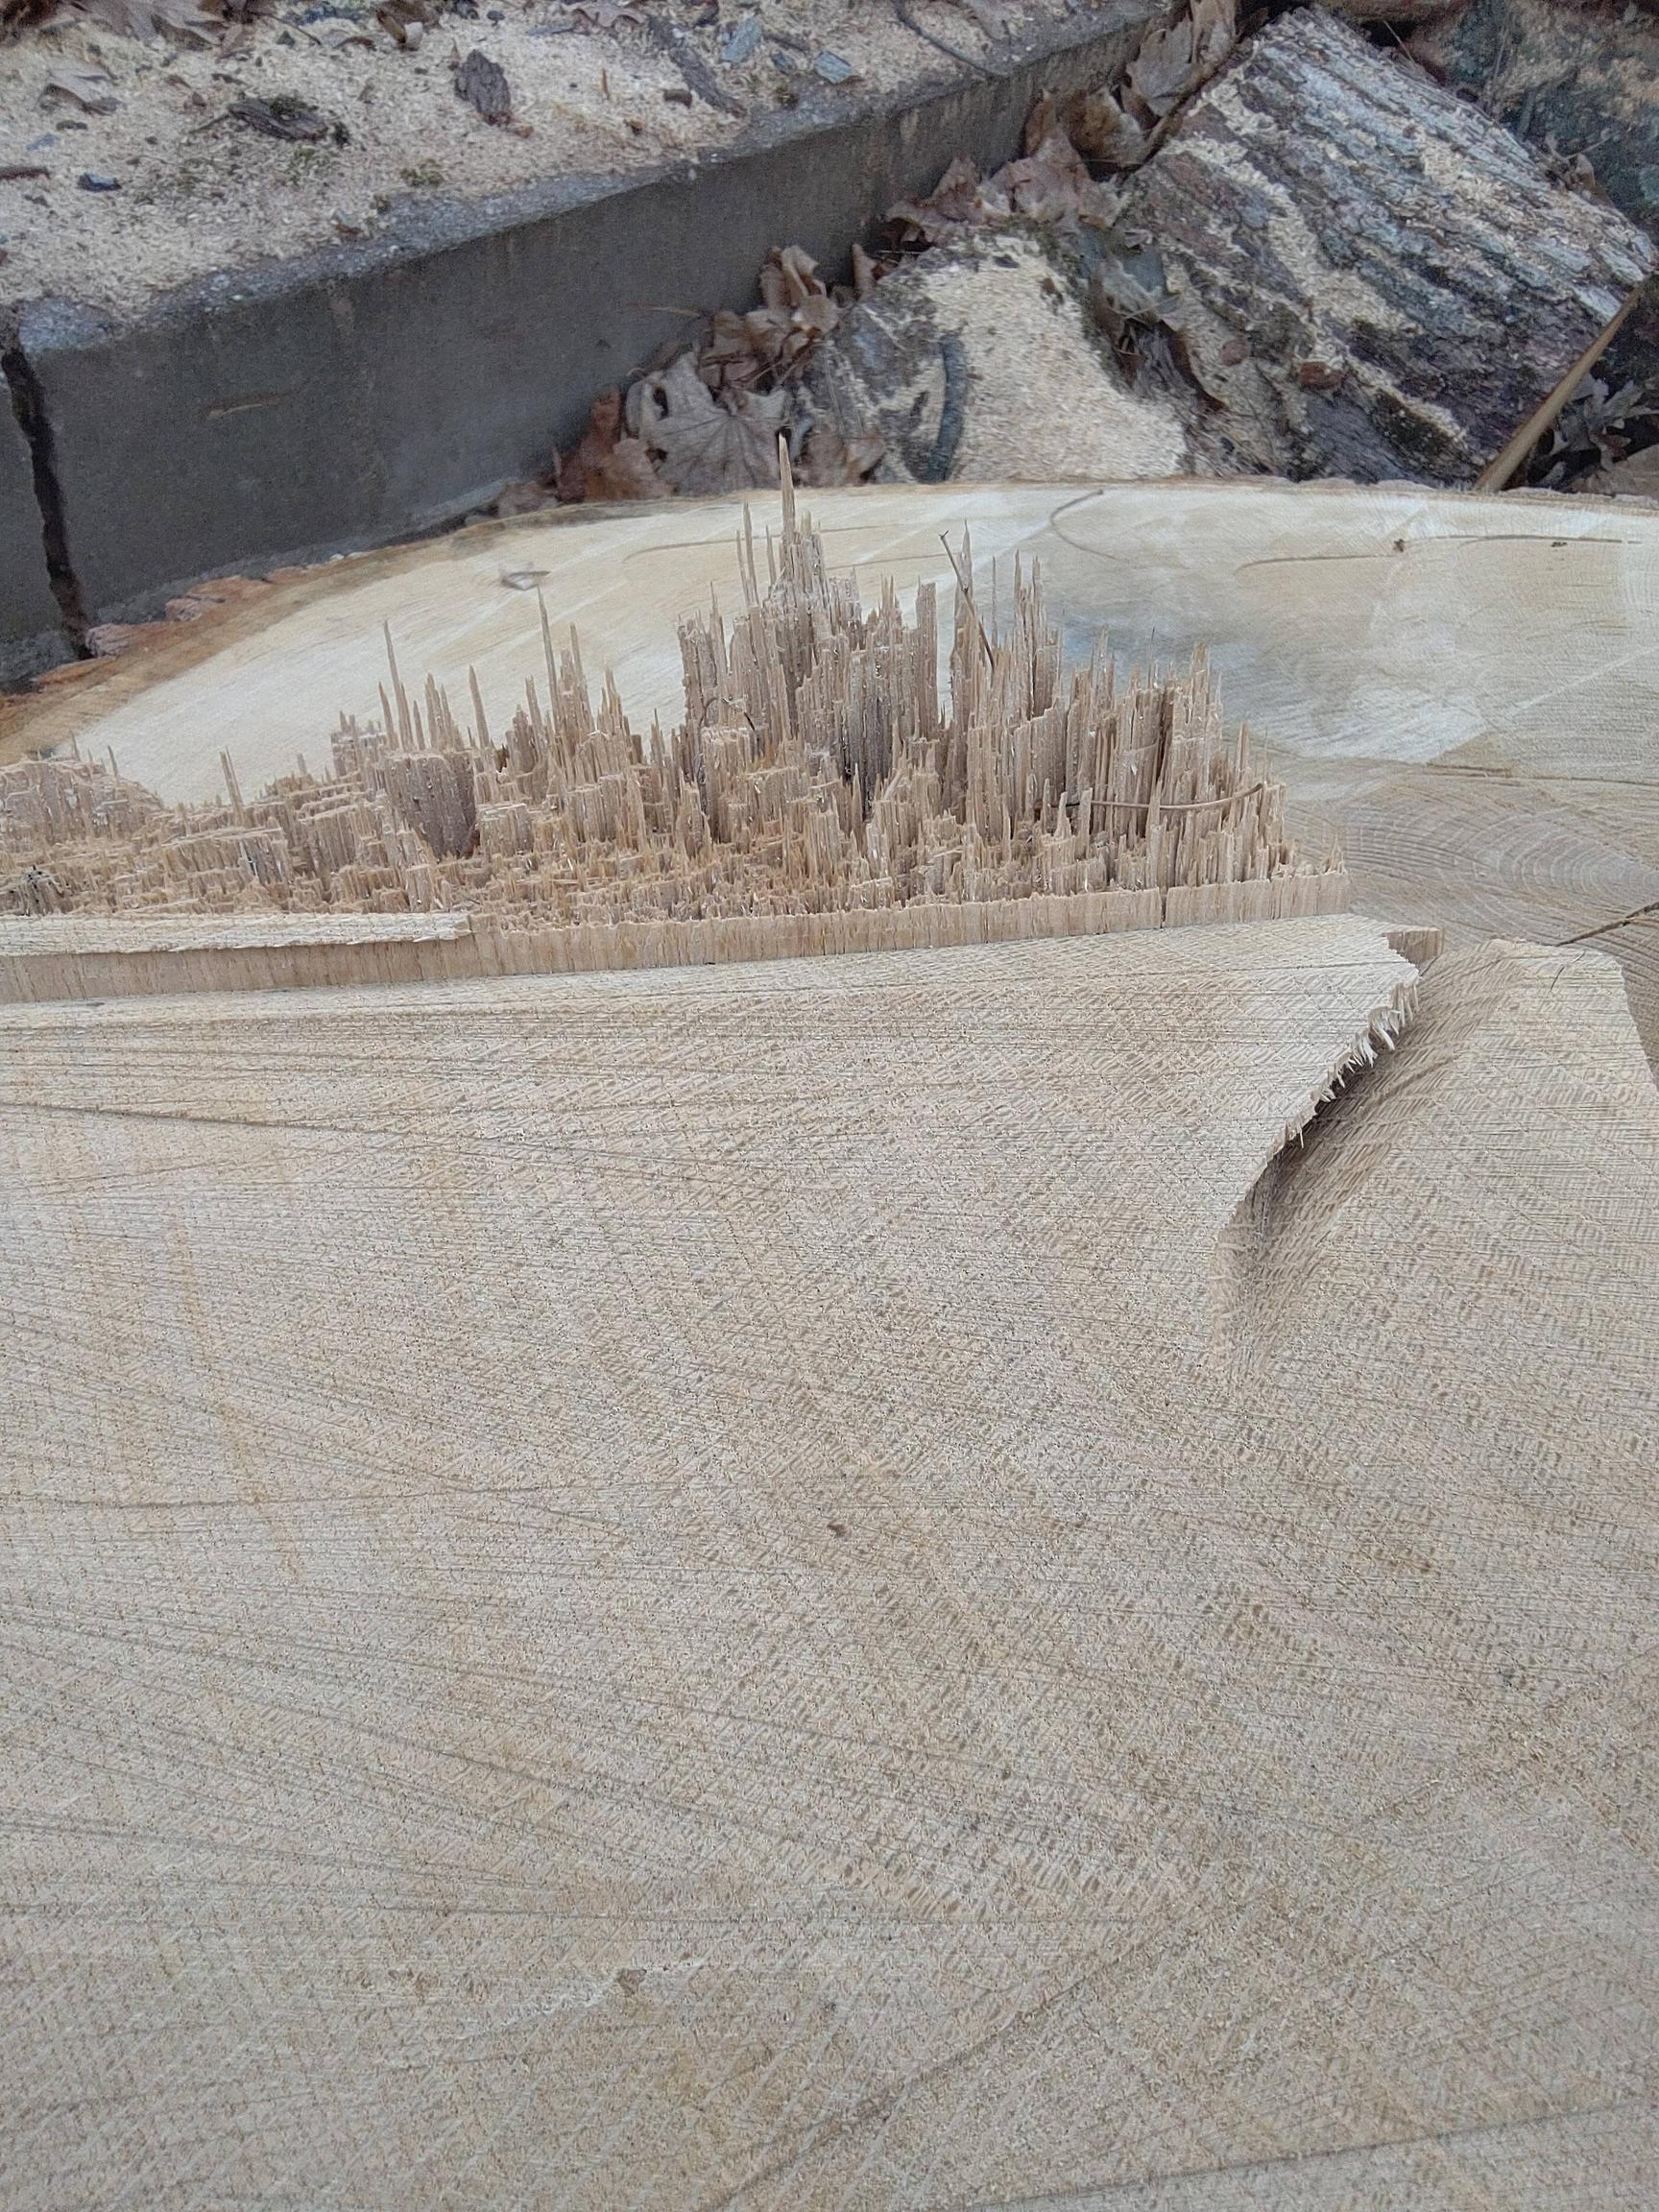 cut tree stump has a jagged section that looks like a city scape rising up from the wood.